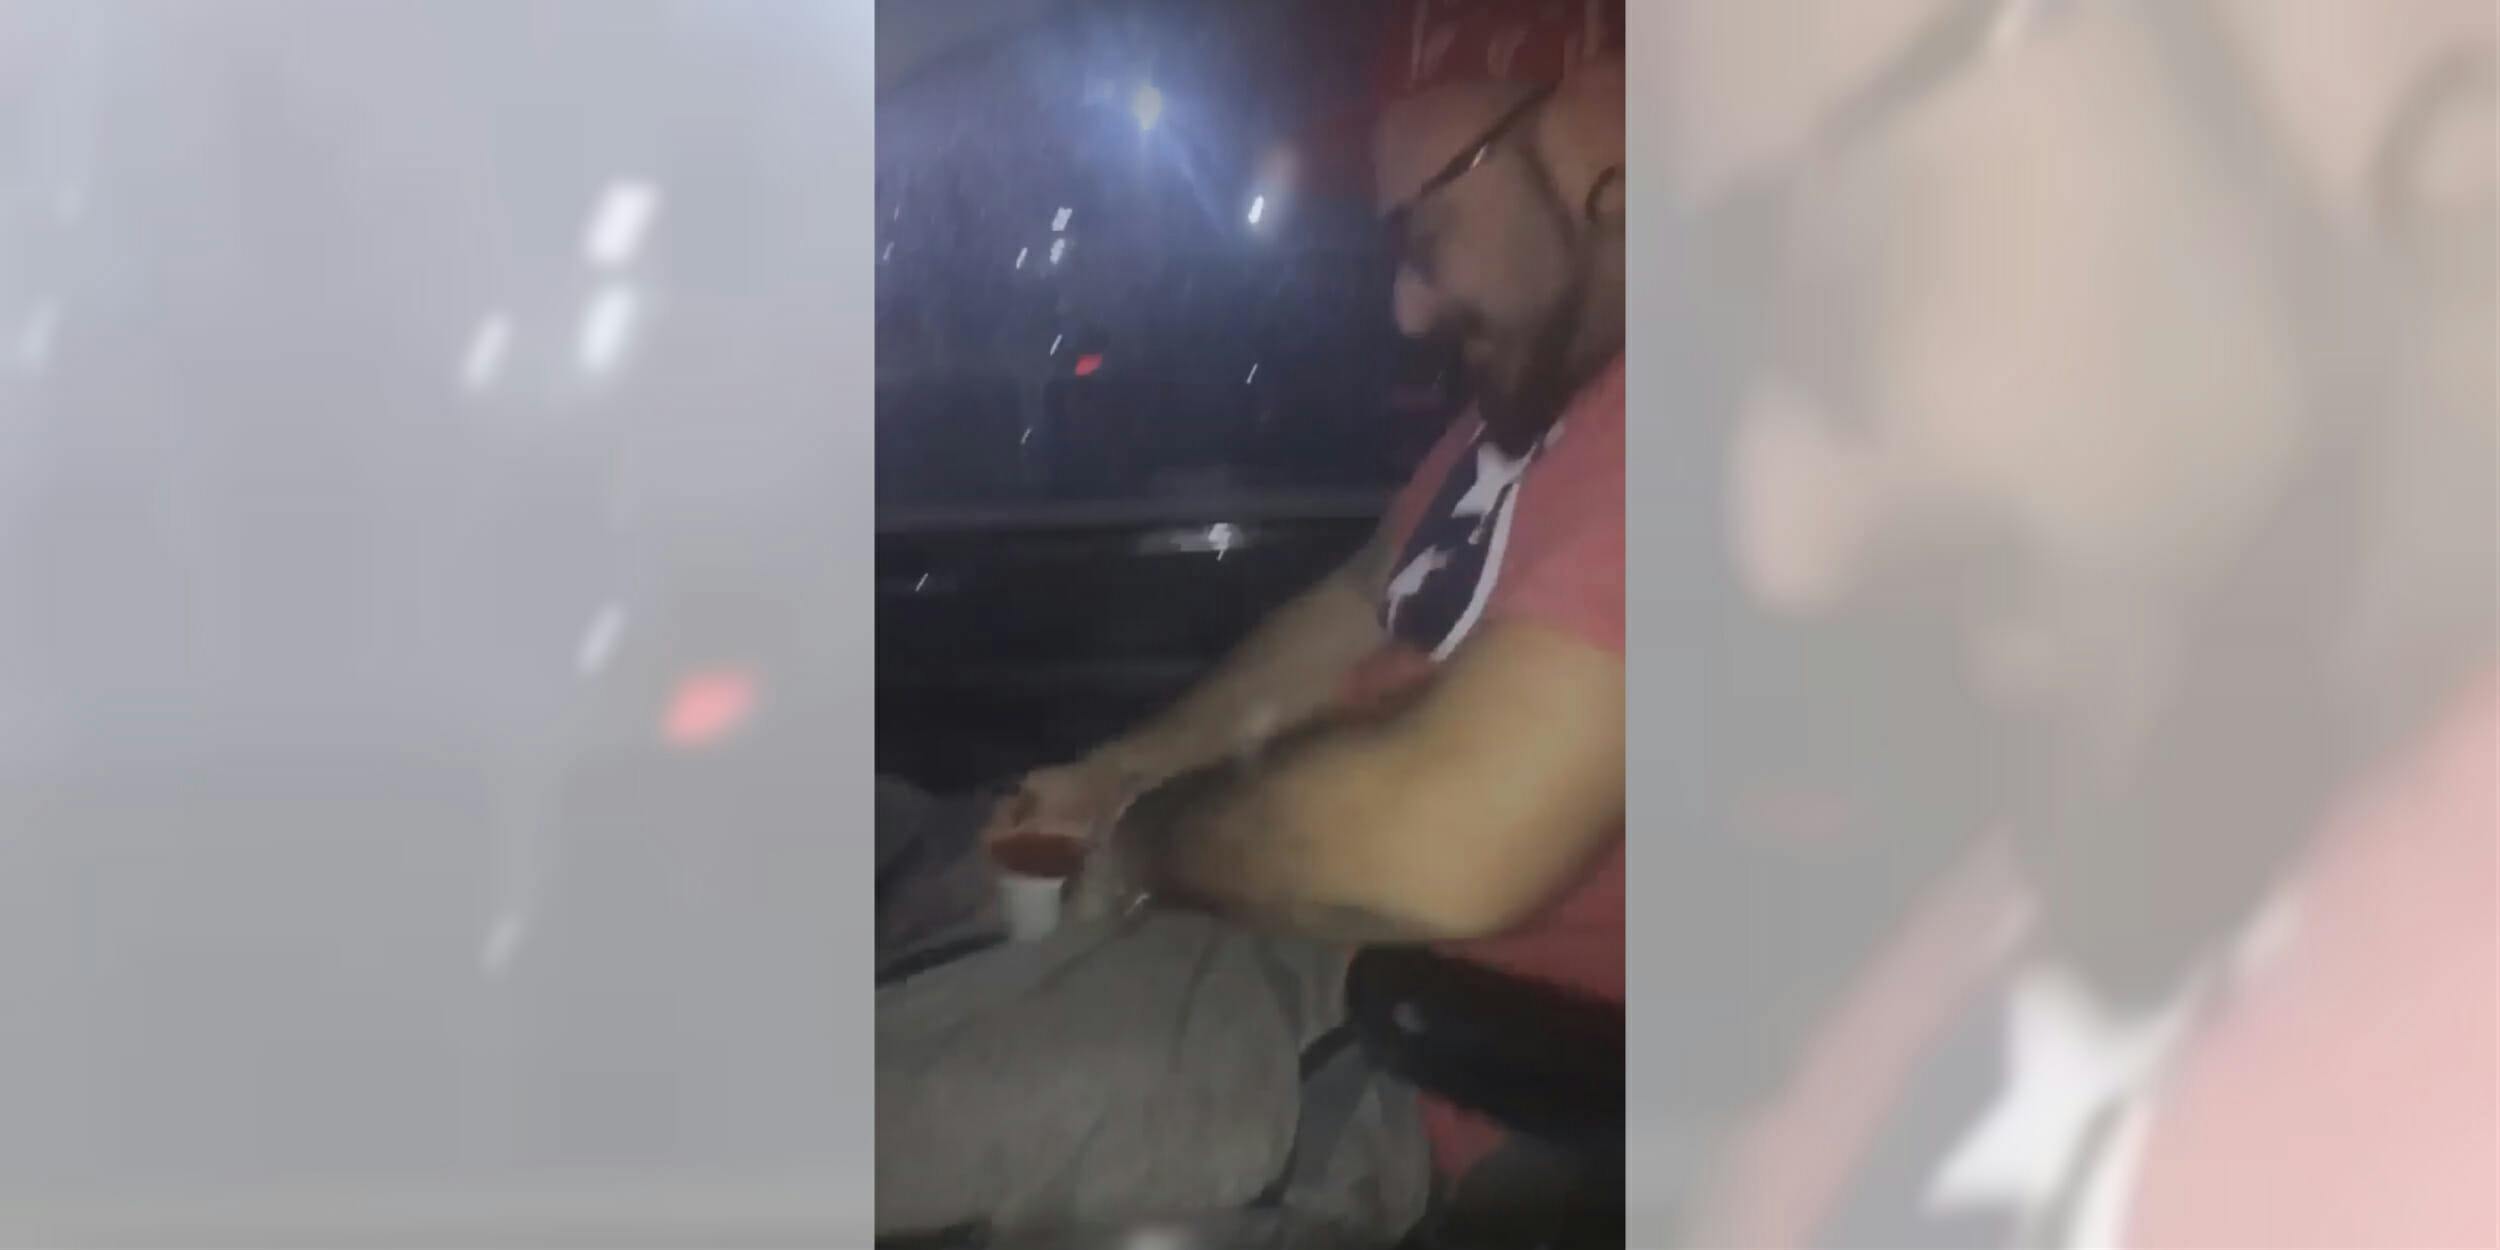 Man faces felony charges after video shows him dipping his crotch in salsa